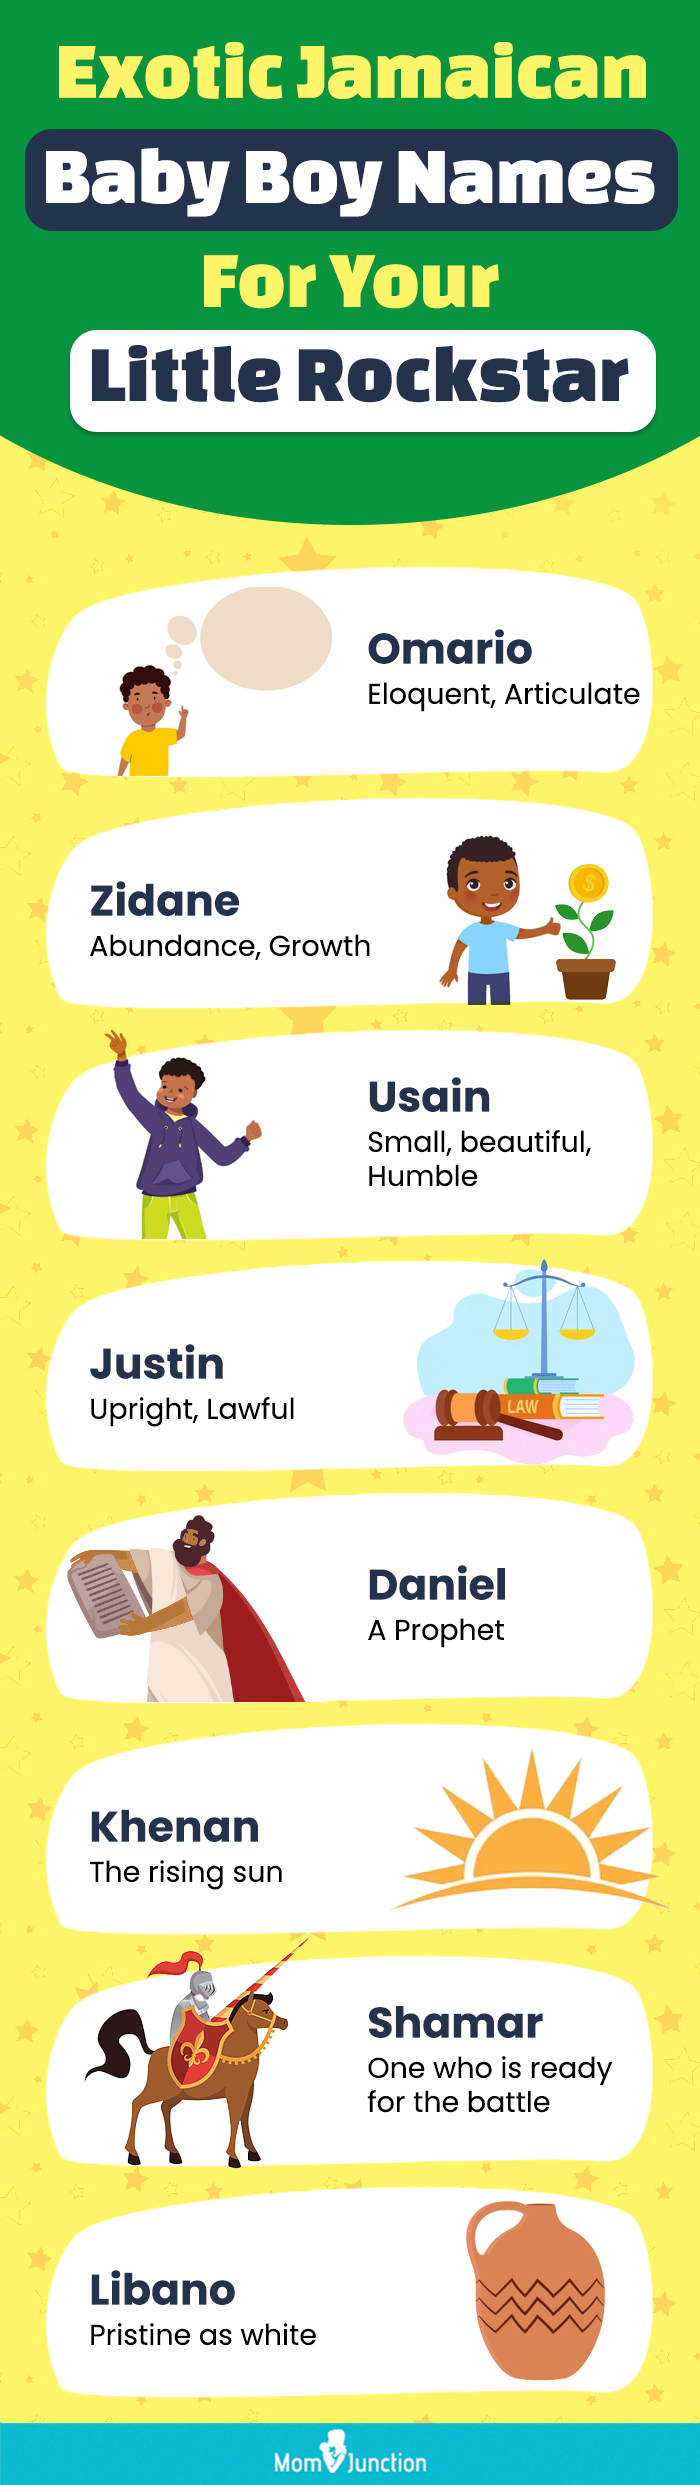 exotic jamaican baby boy names for your little rockstar (infographic)